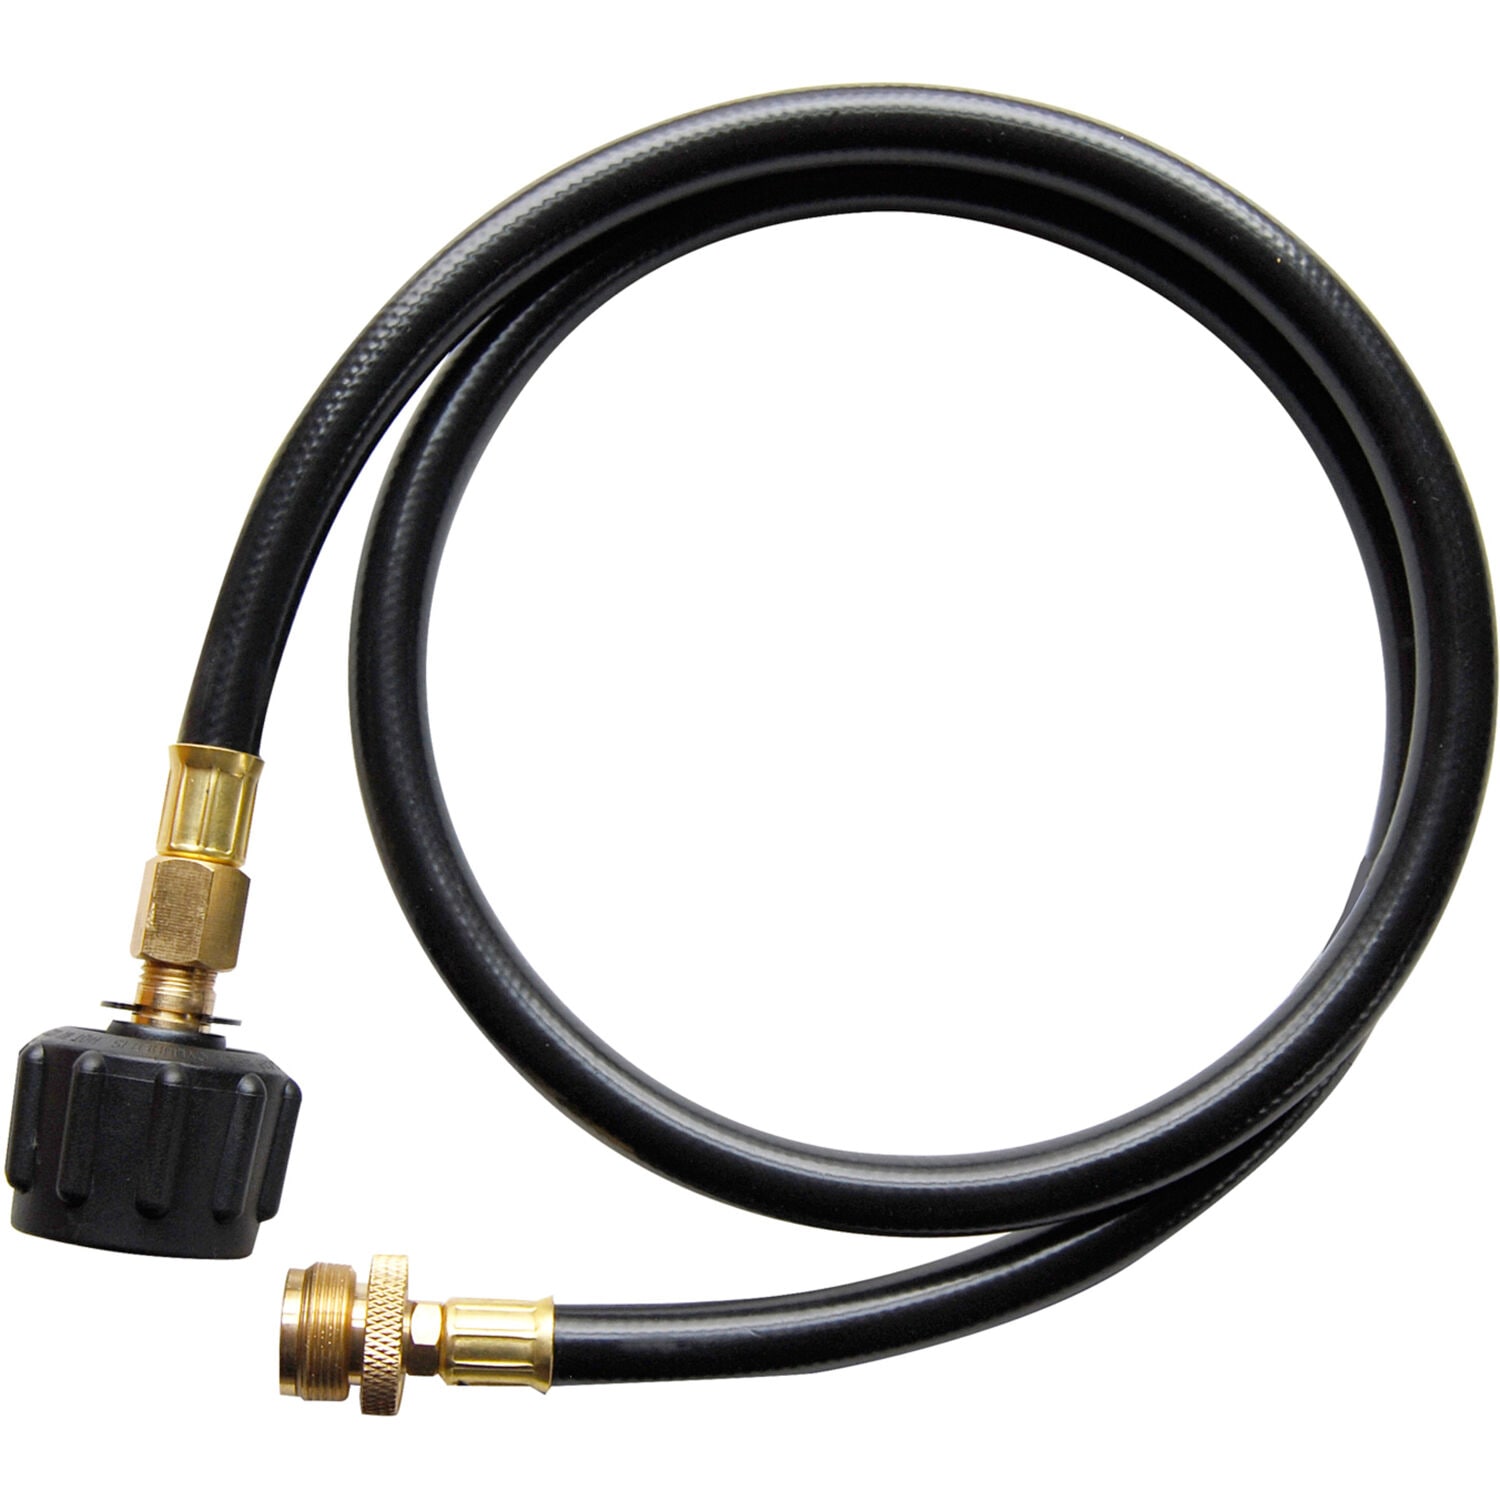 Hose connector Garden Hoses & Accessories at